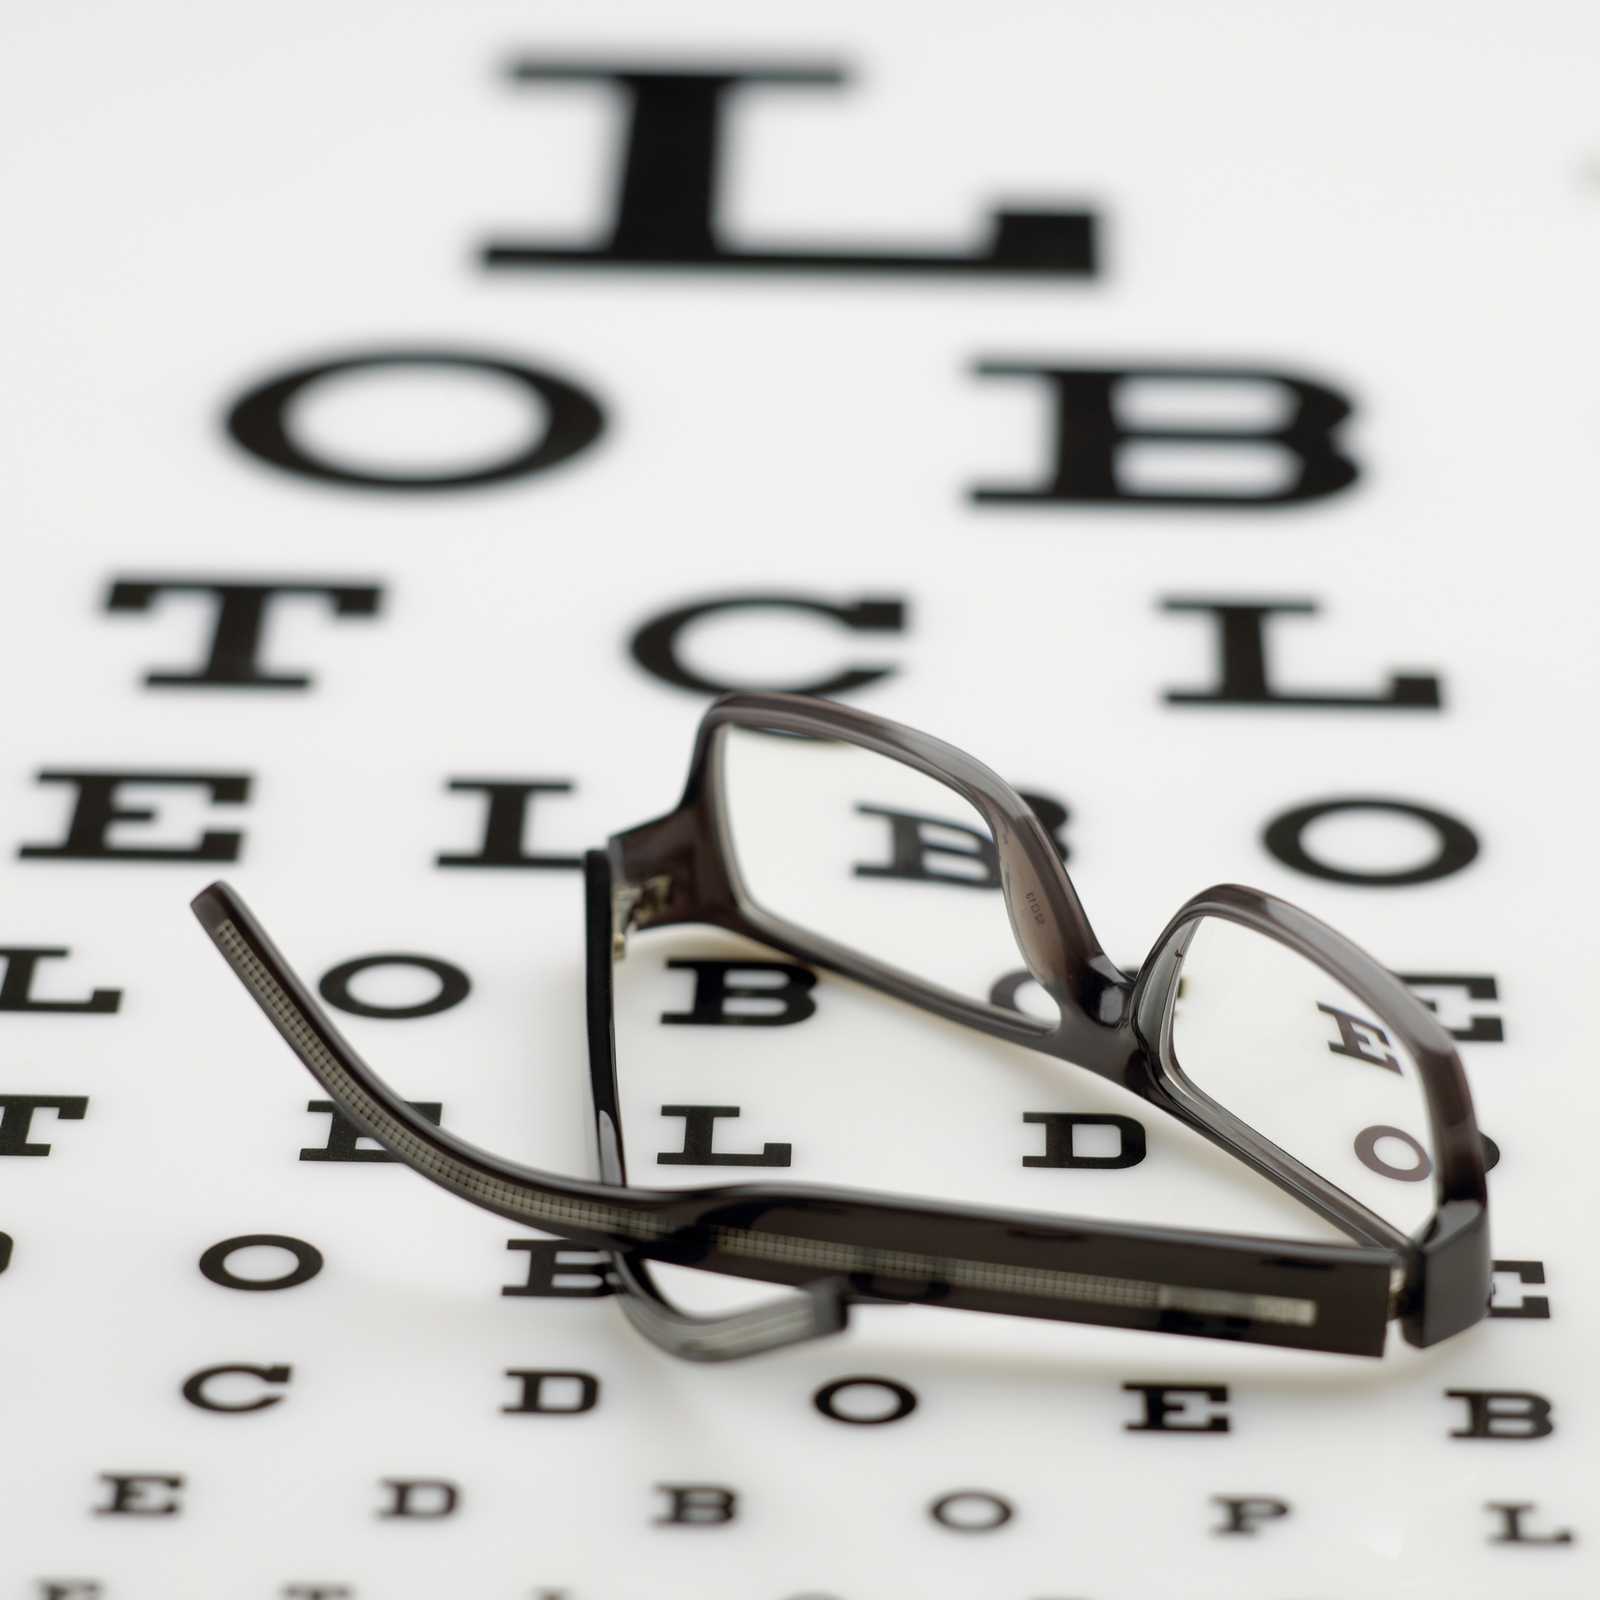 An eye chart with eyeglasses laying on top